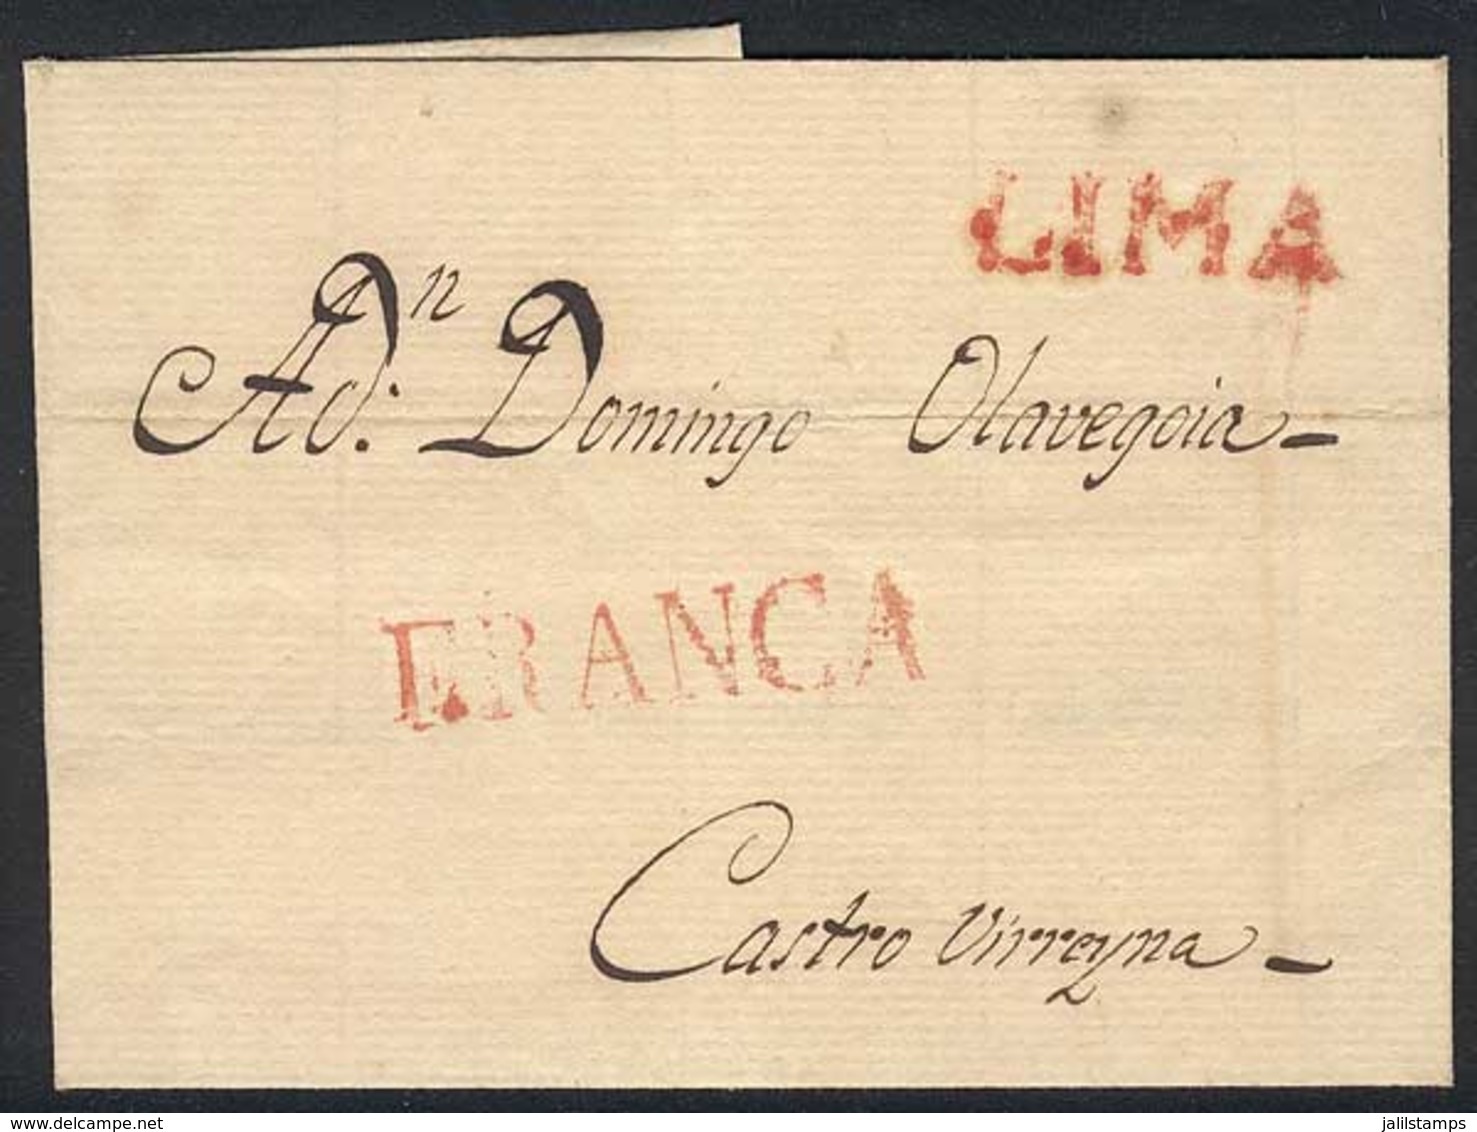 PERU: Folded Cover Sent To Castro, With Red "LIMA" And "FRANCA" Markings, Very Fine Quality!" - Peru